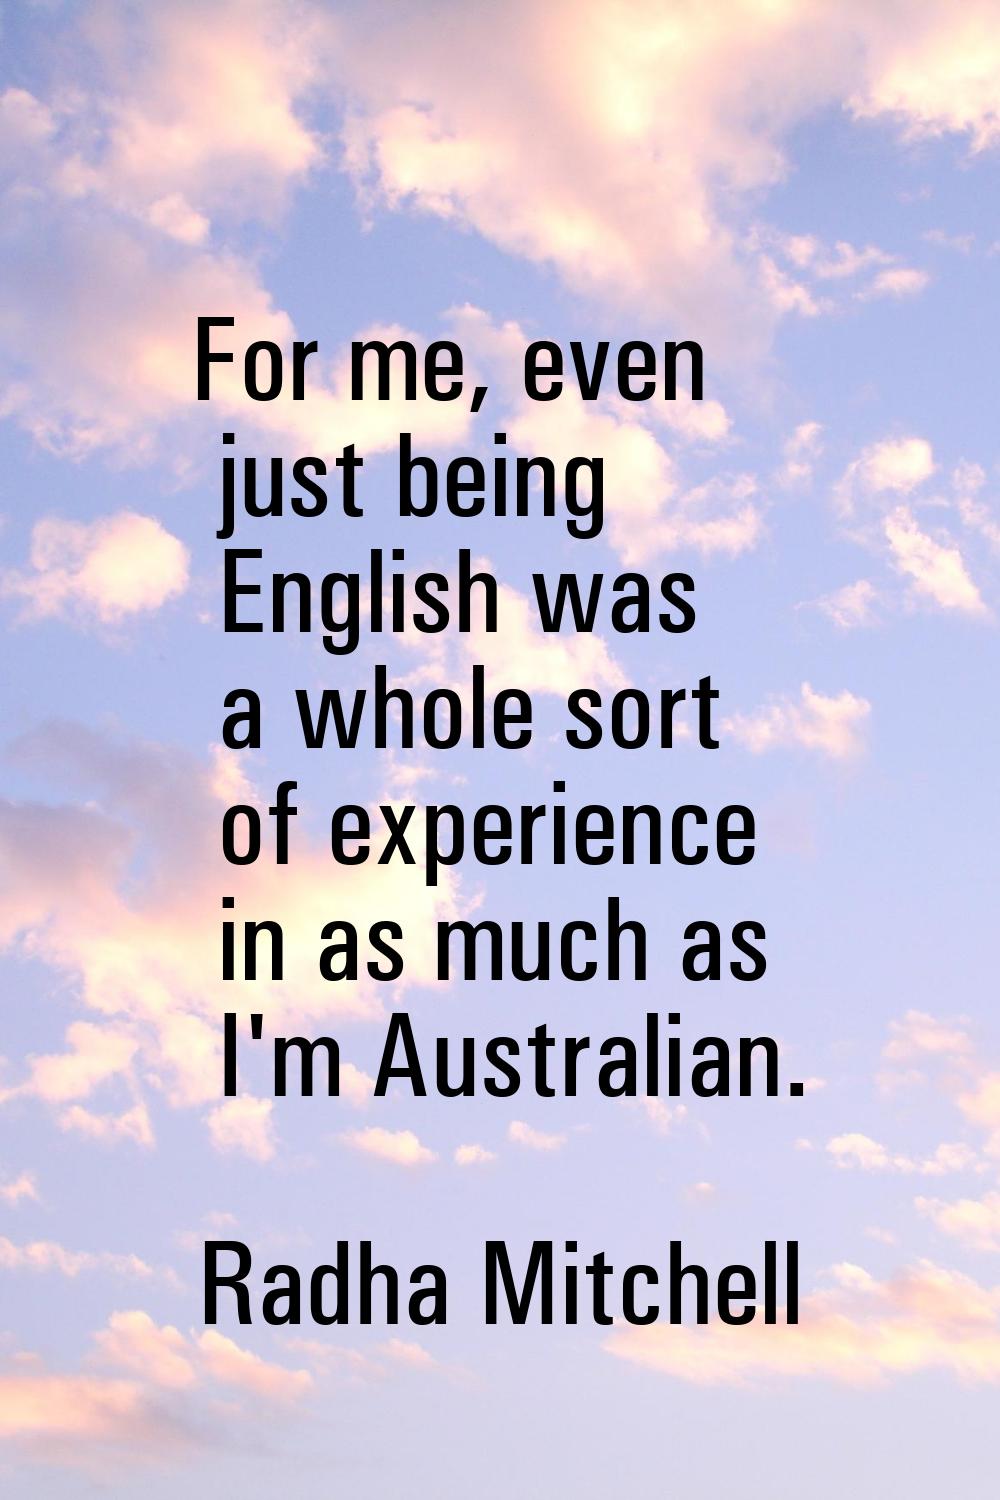 For me, even just being English was a whole sort of experience in as much as I'm Australian.